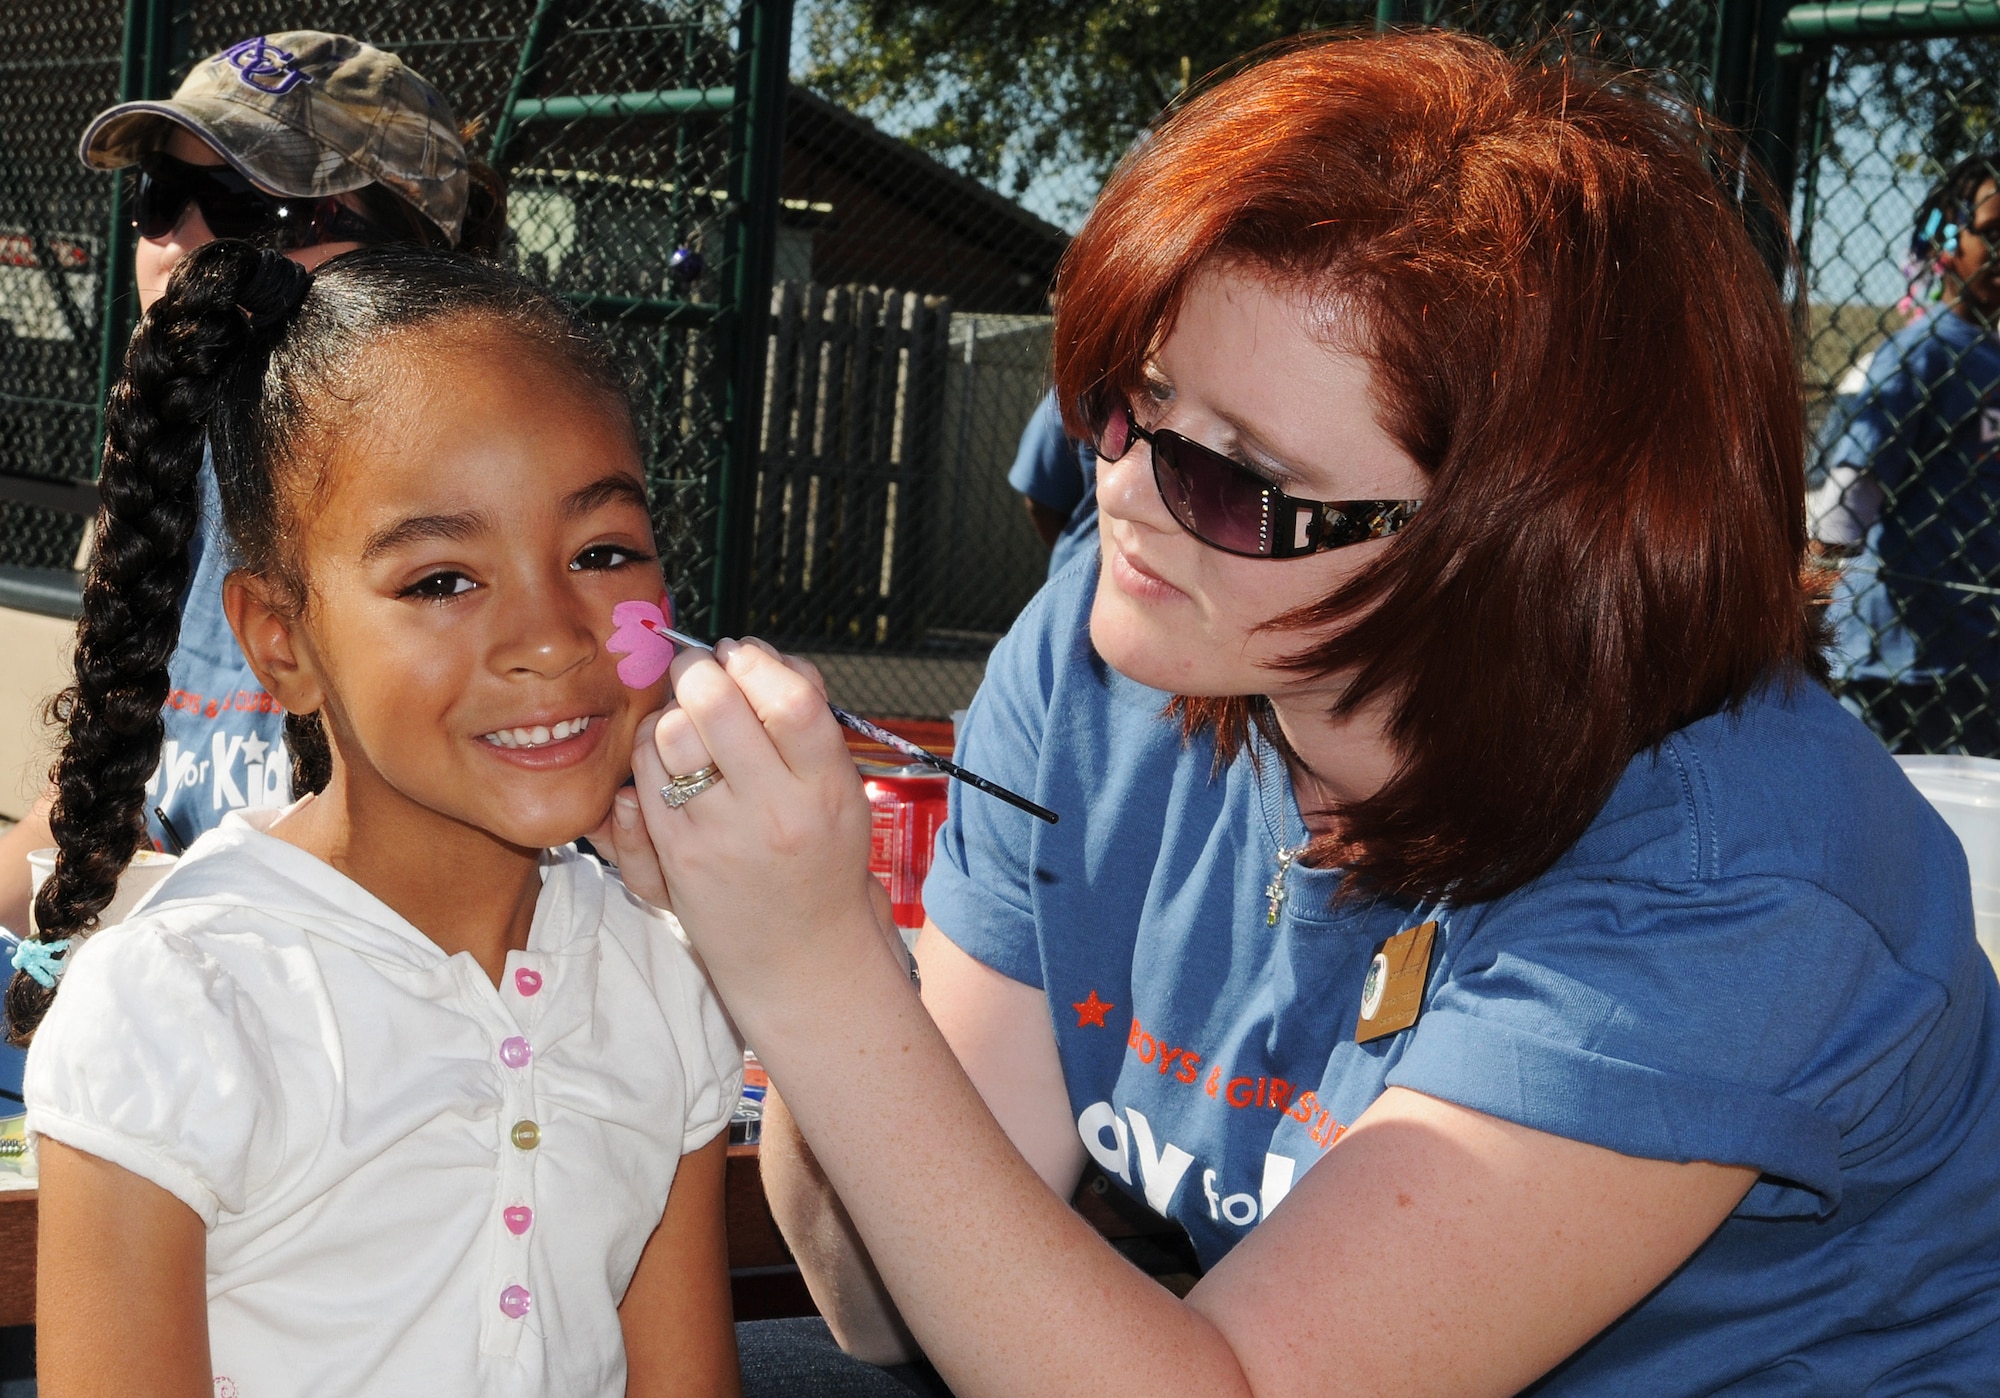 RAF MILDENHALL, England -- Alexys Guzman, 5, gets her face painted by Amands Woods, RAF Mildenhall Youth Center school age coordinator, at the Youth Center Sept. 12. Children from the base community and local area gathered for Boys and Girls Club Kids Day to play a variety of games. (U.S. Air Force photo/Senior Airman Thomas Trower) 